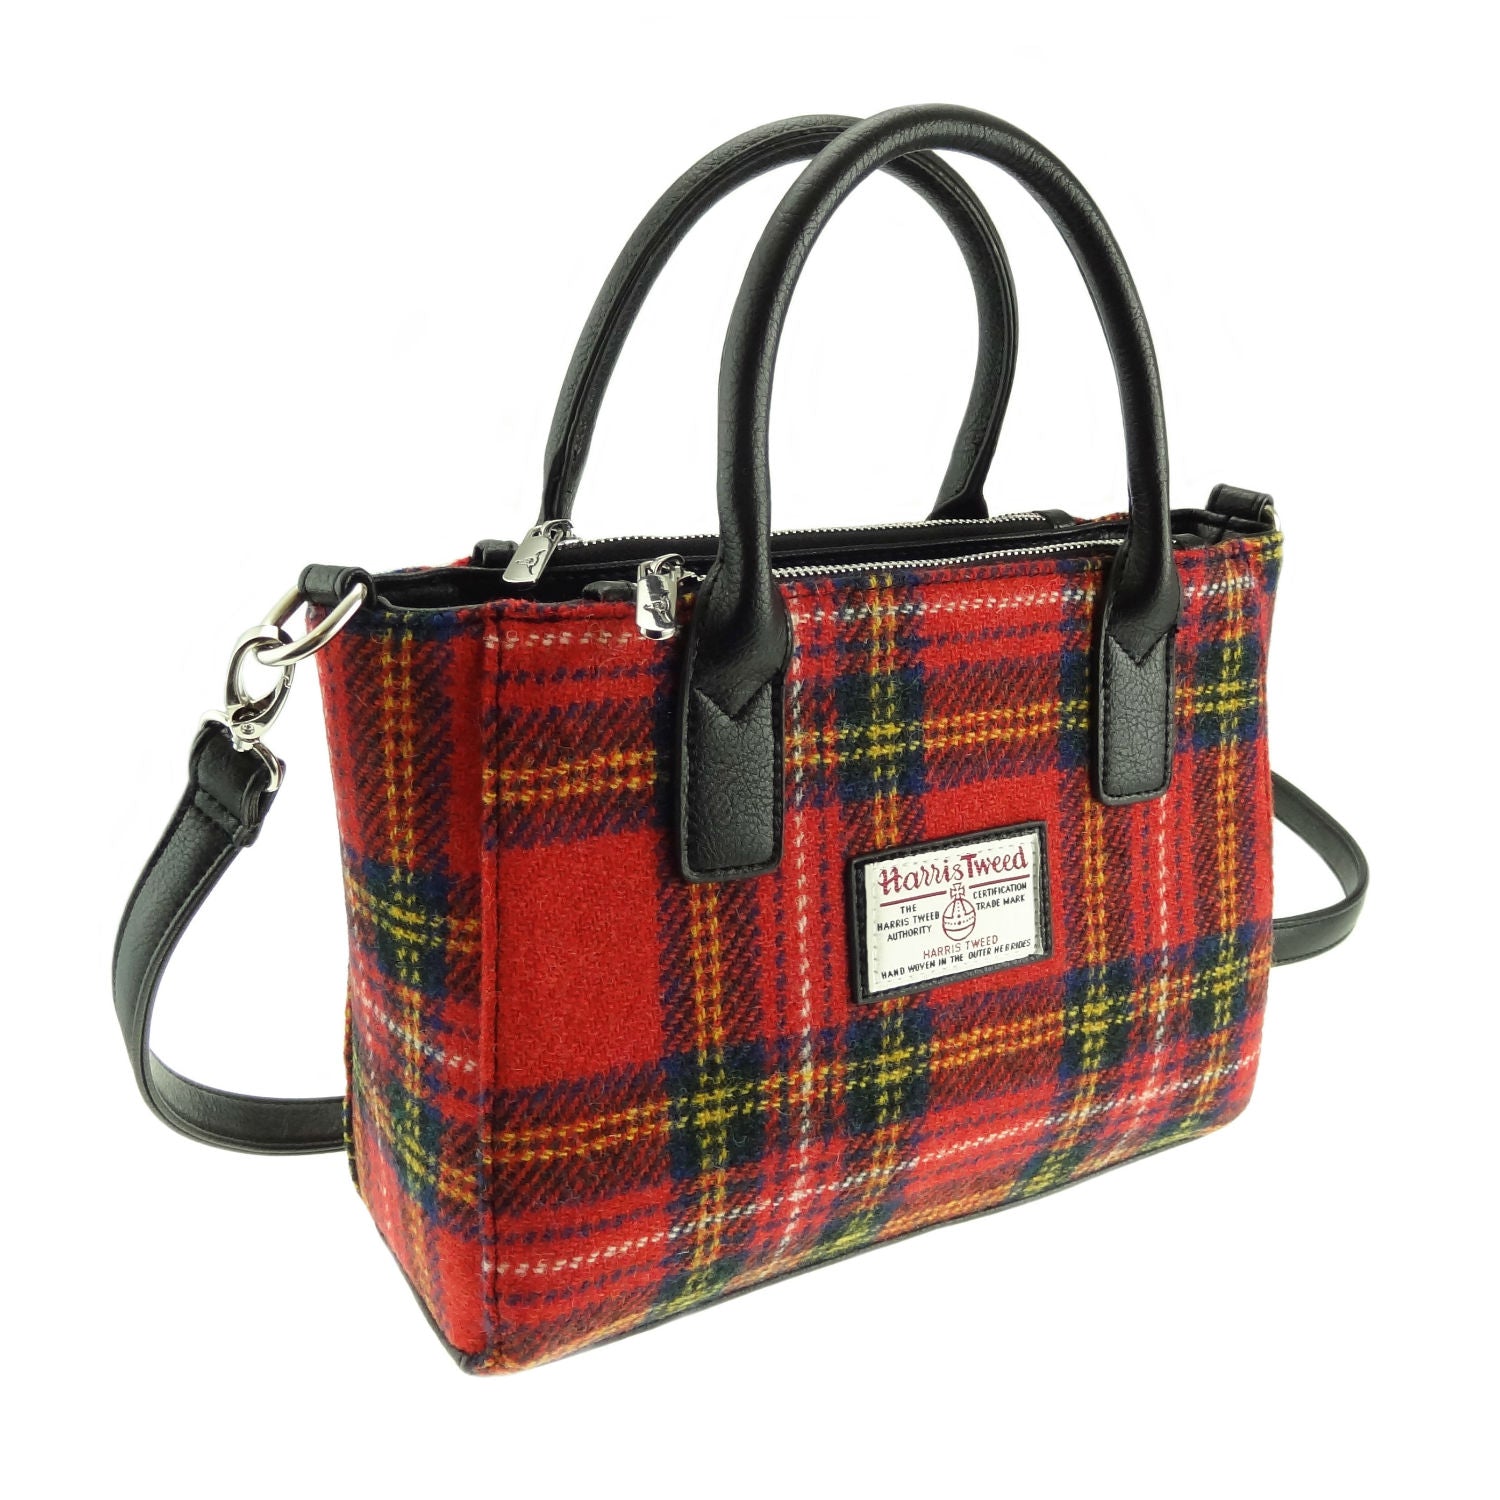 Harris Tweed Small Tote Bag with Shoulder Strap by Glen Appin - Brora LB1228